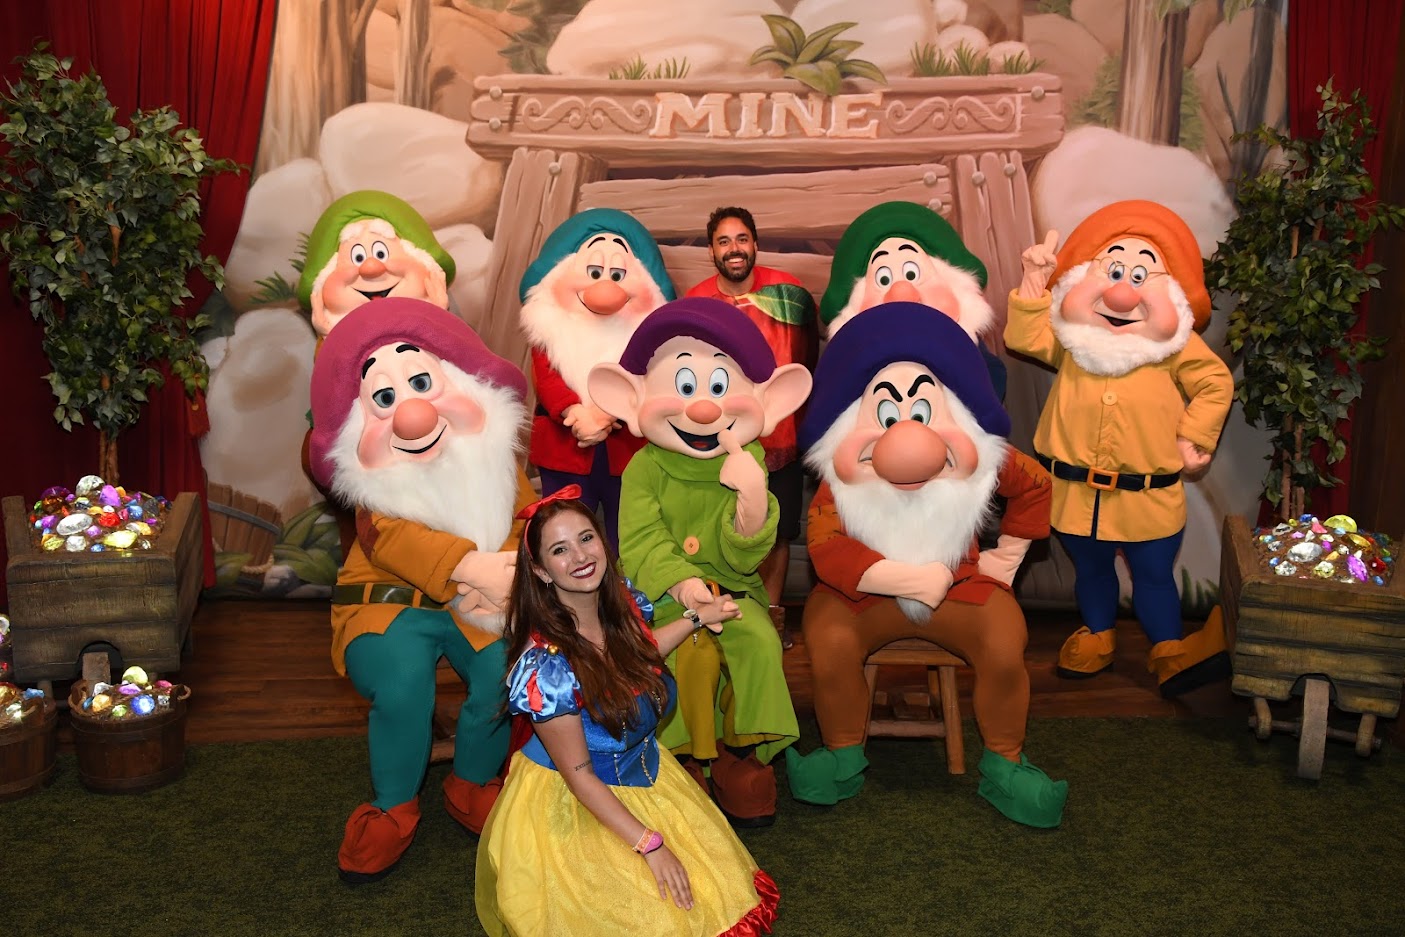 Nath and Carlos with the Seven Dwarfs at Disney's Halloween Party